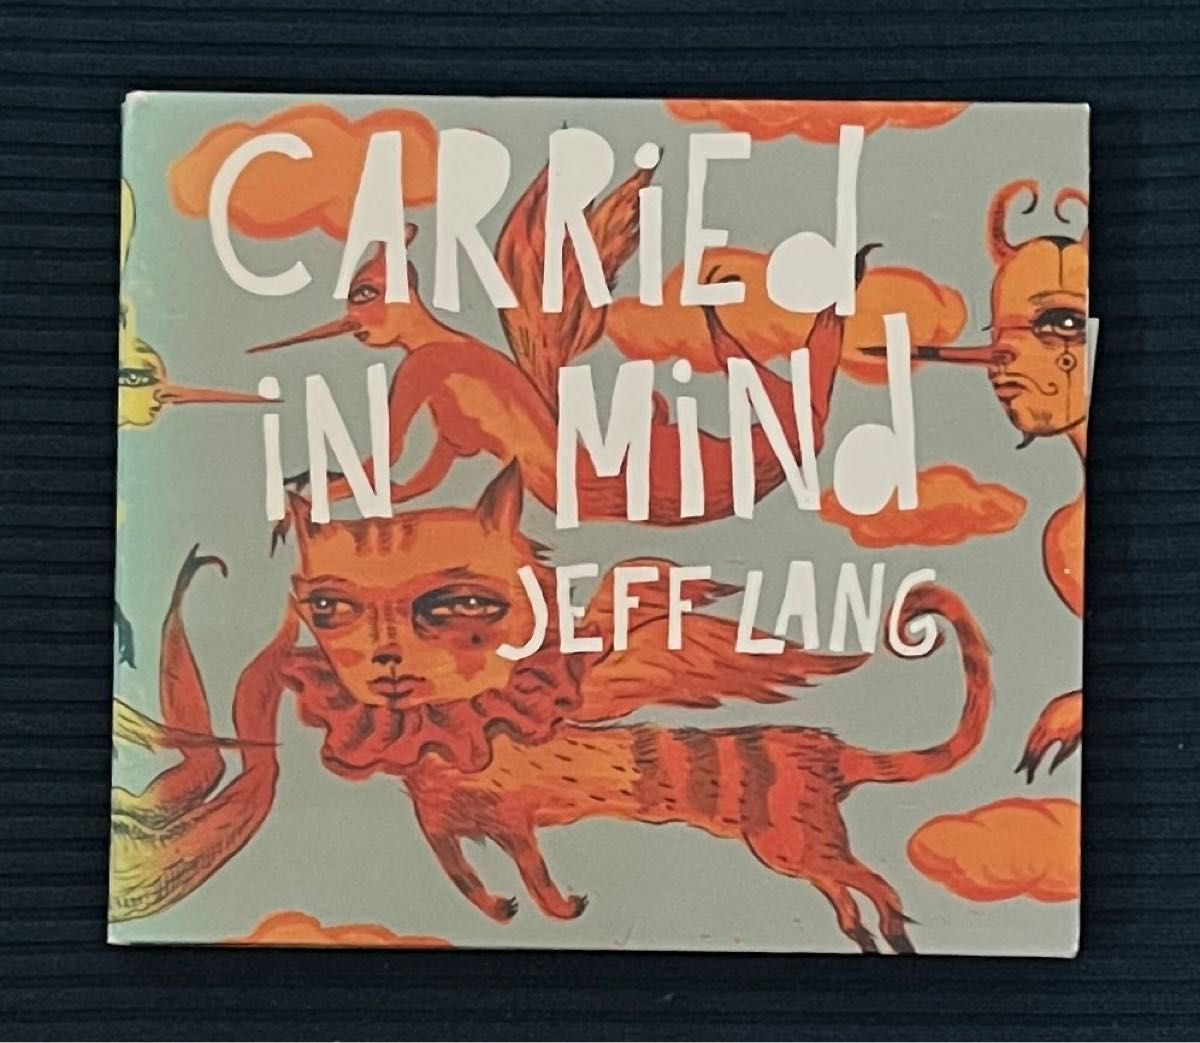 JEFF LANG / CARRIED IN MIND 帯付 国内盤